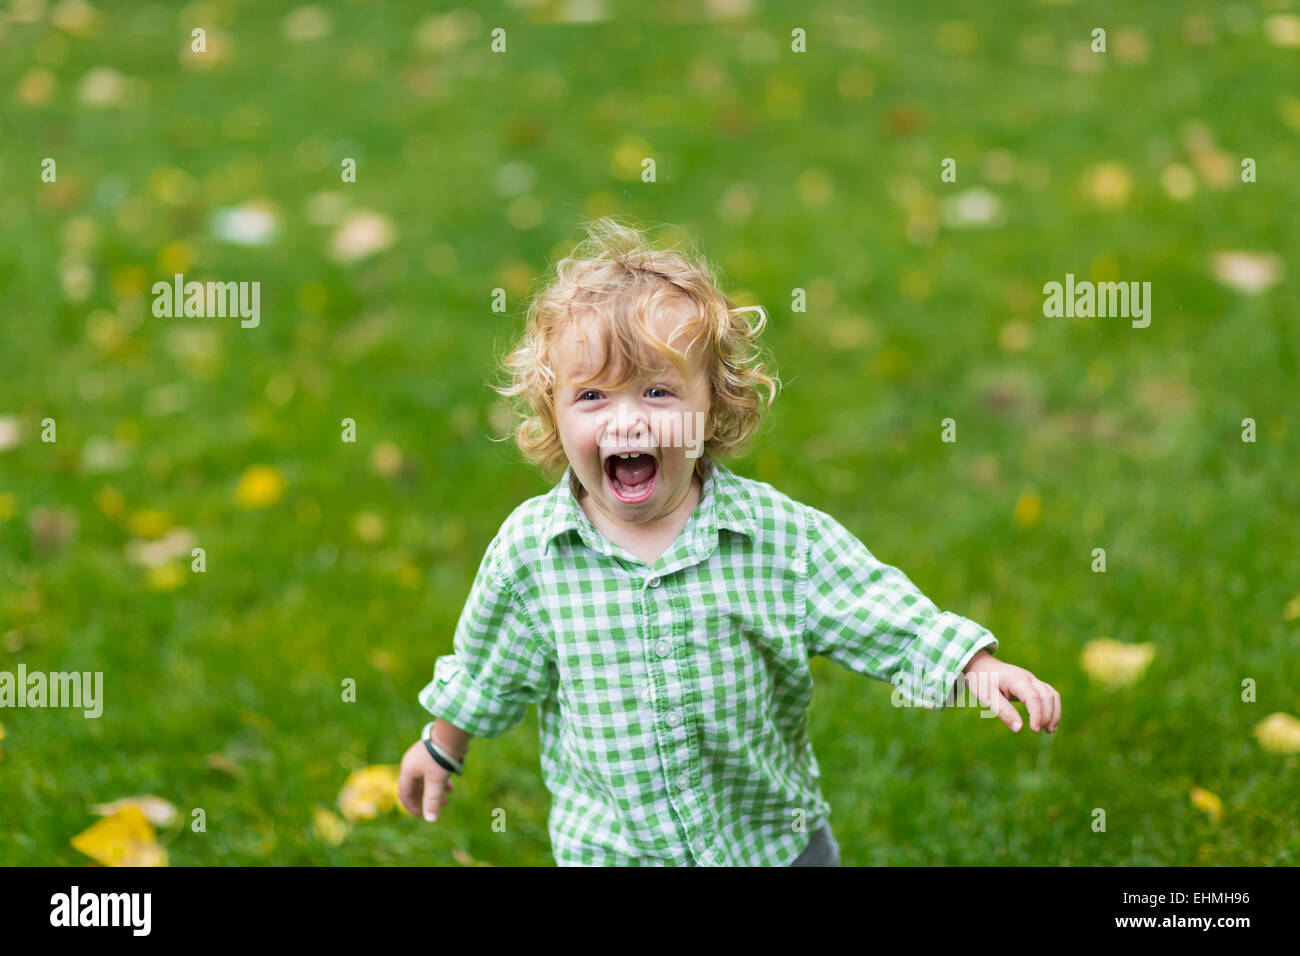 Woman laughing in field Banque D'Images